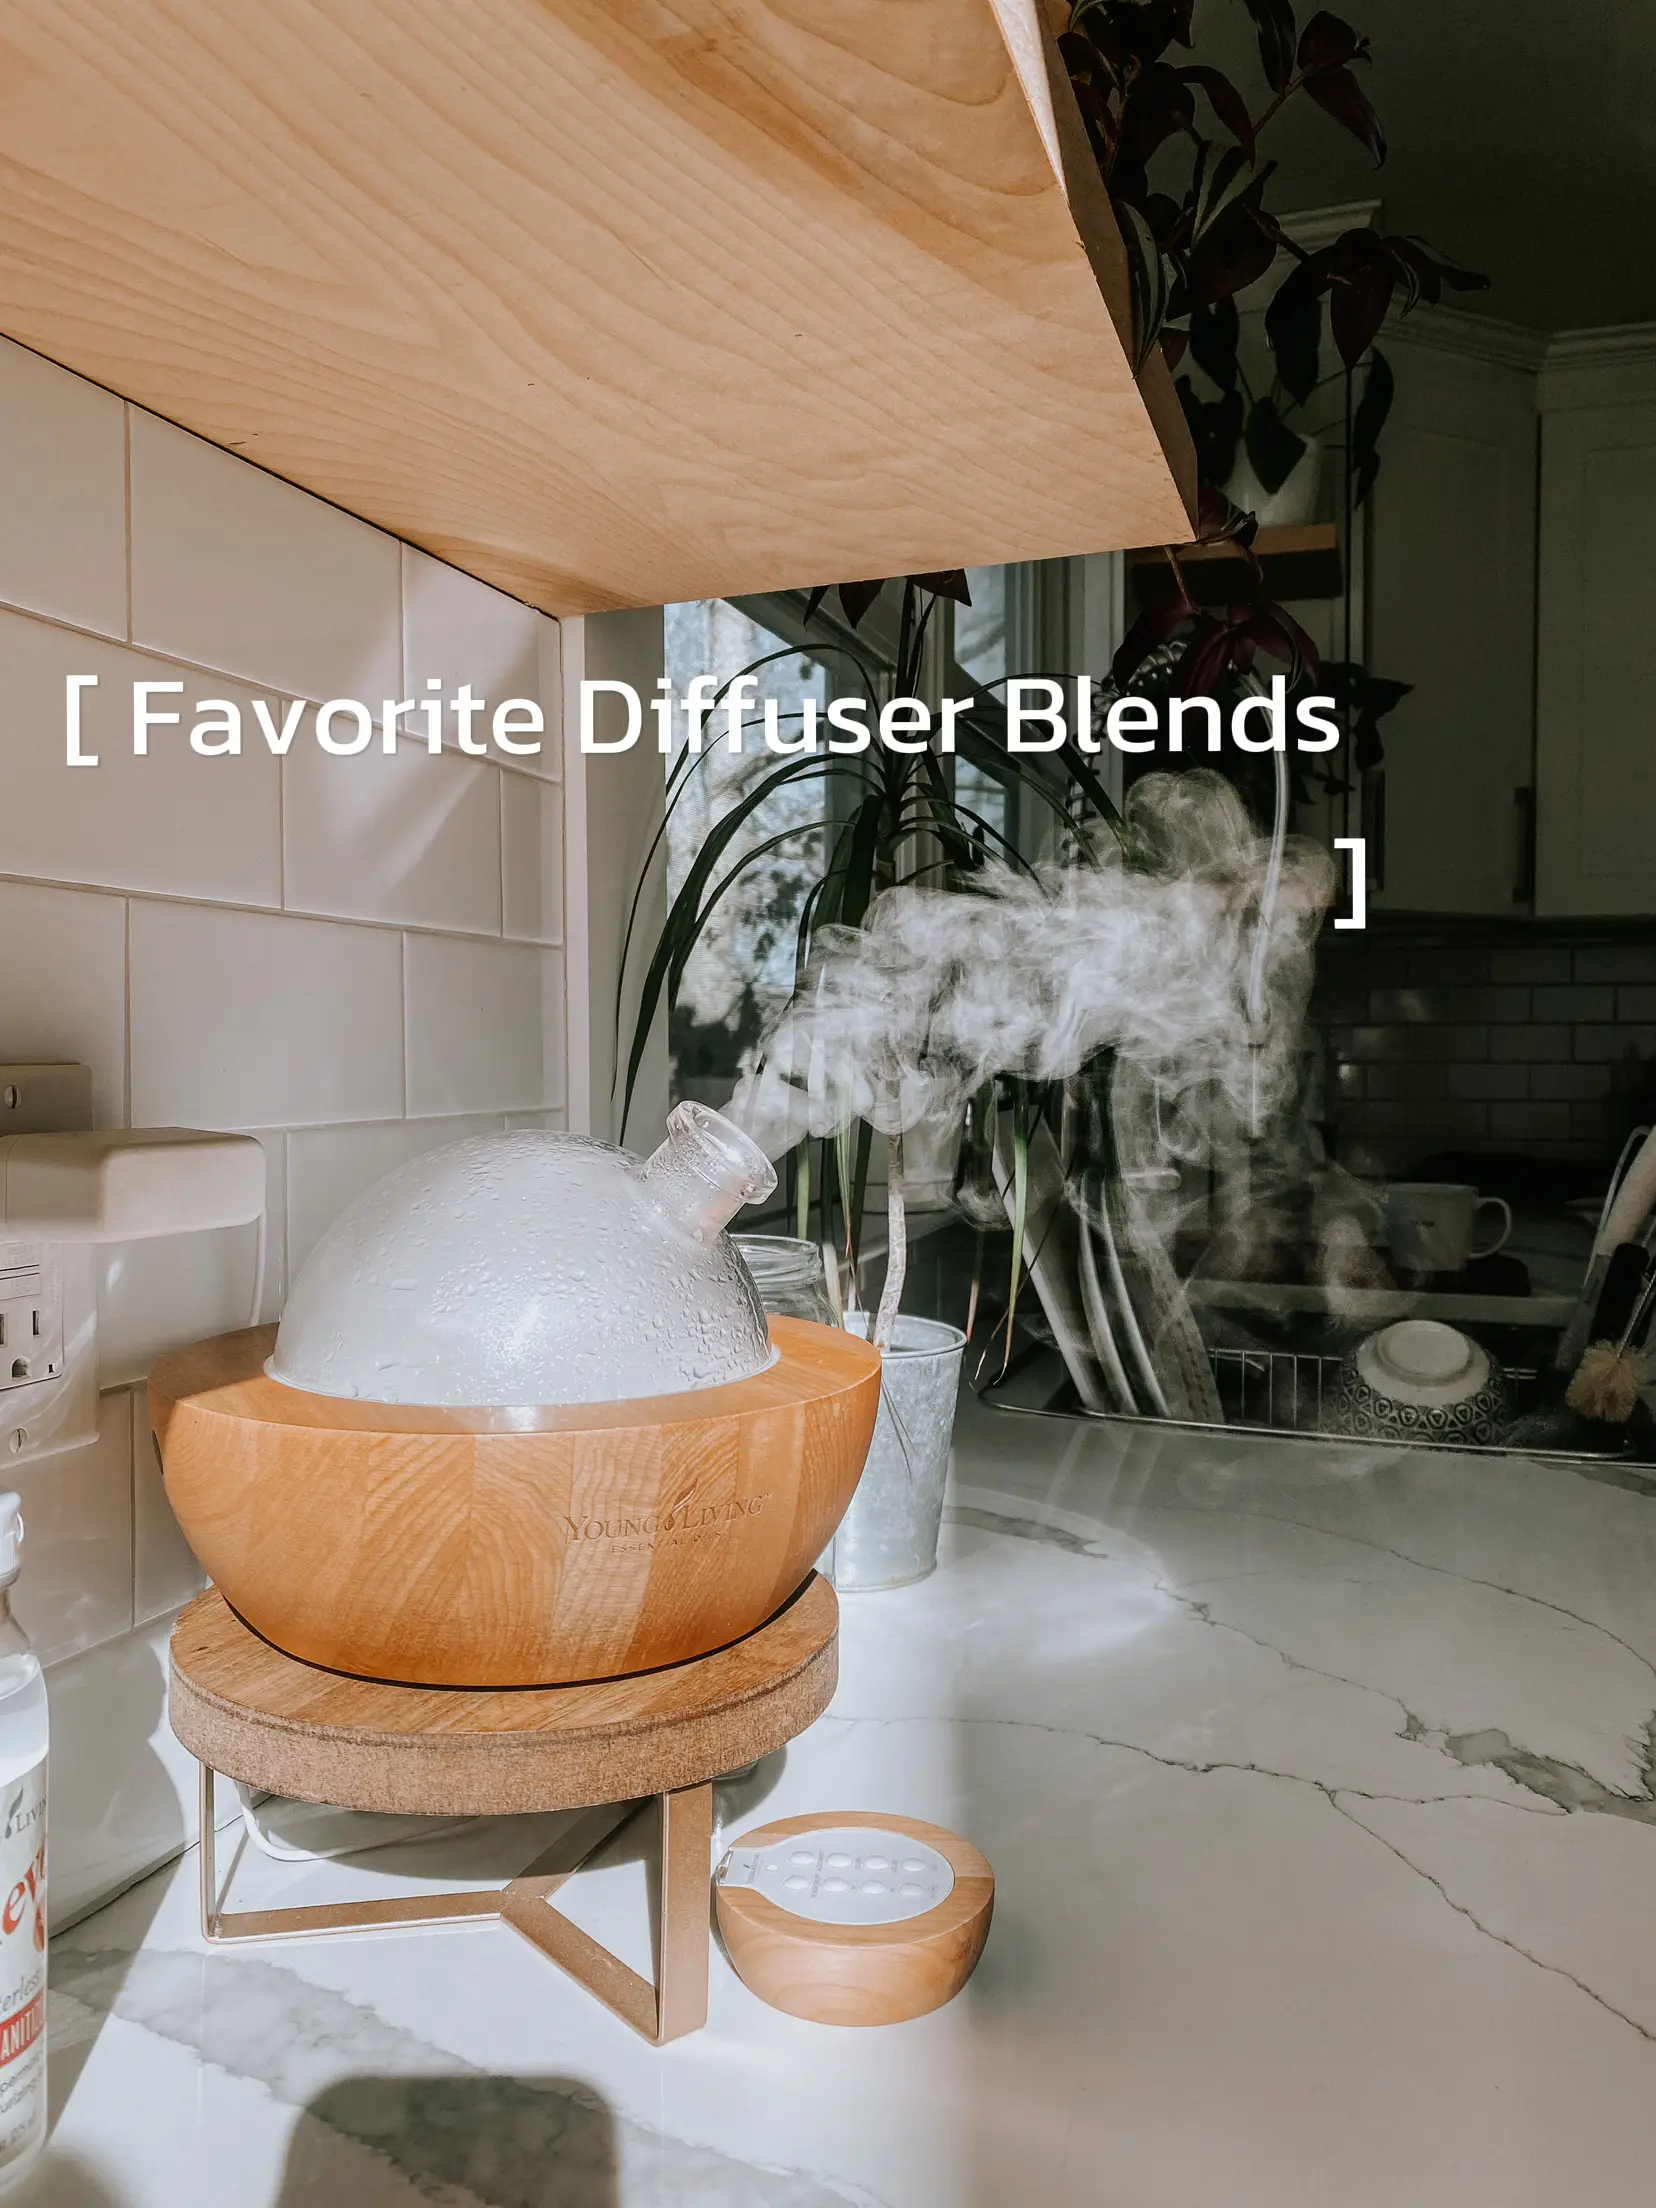 Santal Diffuser Oil Review by #Sesneslabs, Diffuser Oils